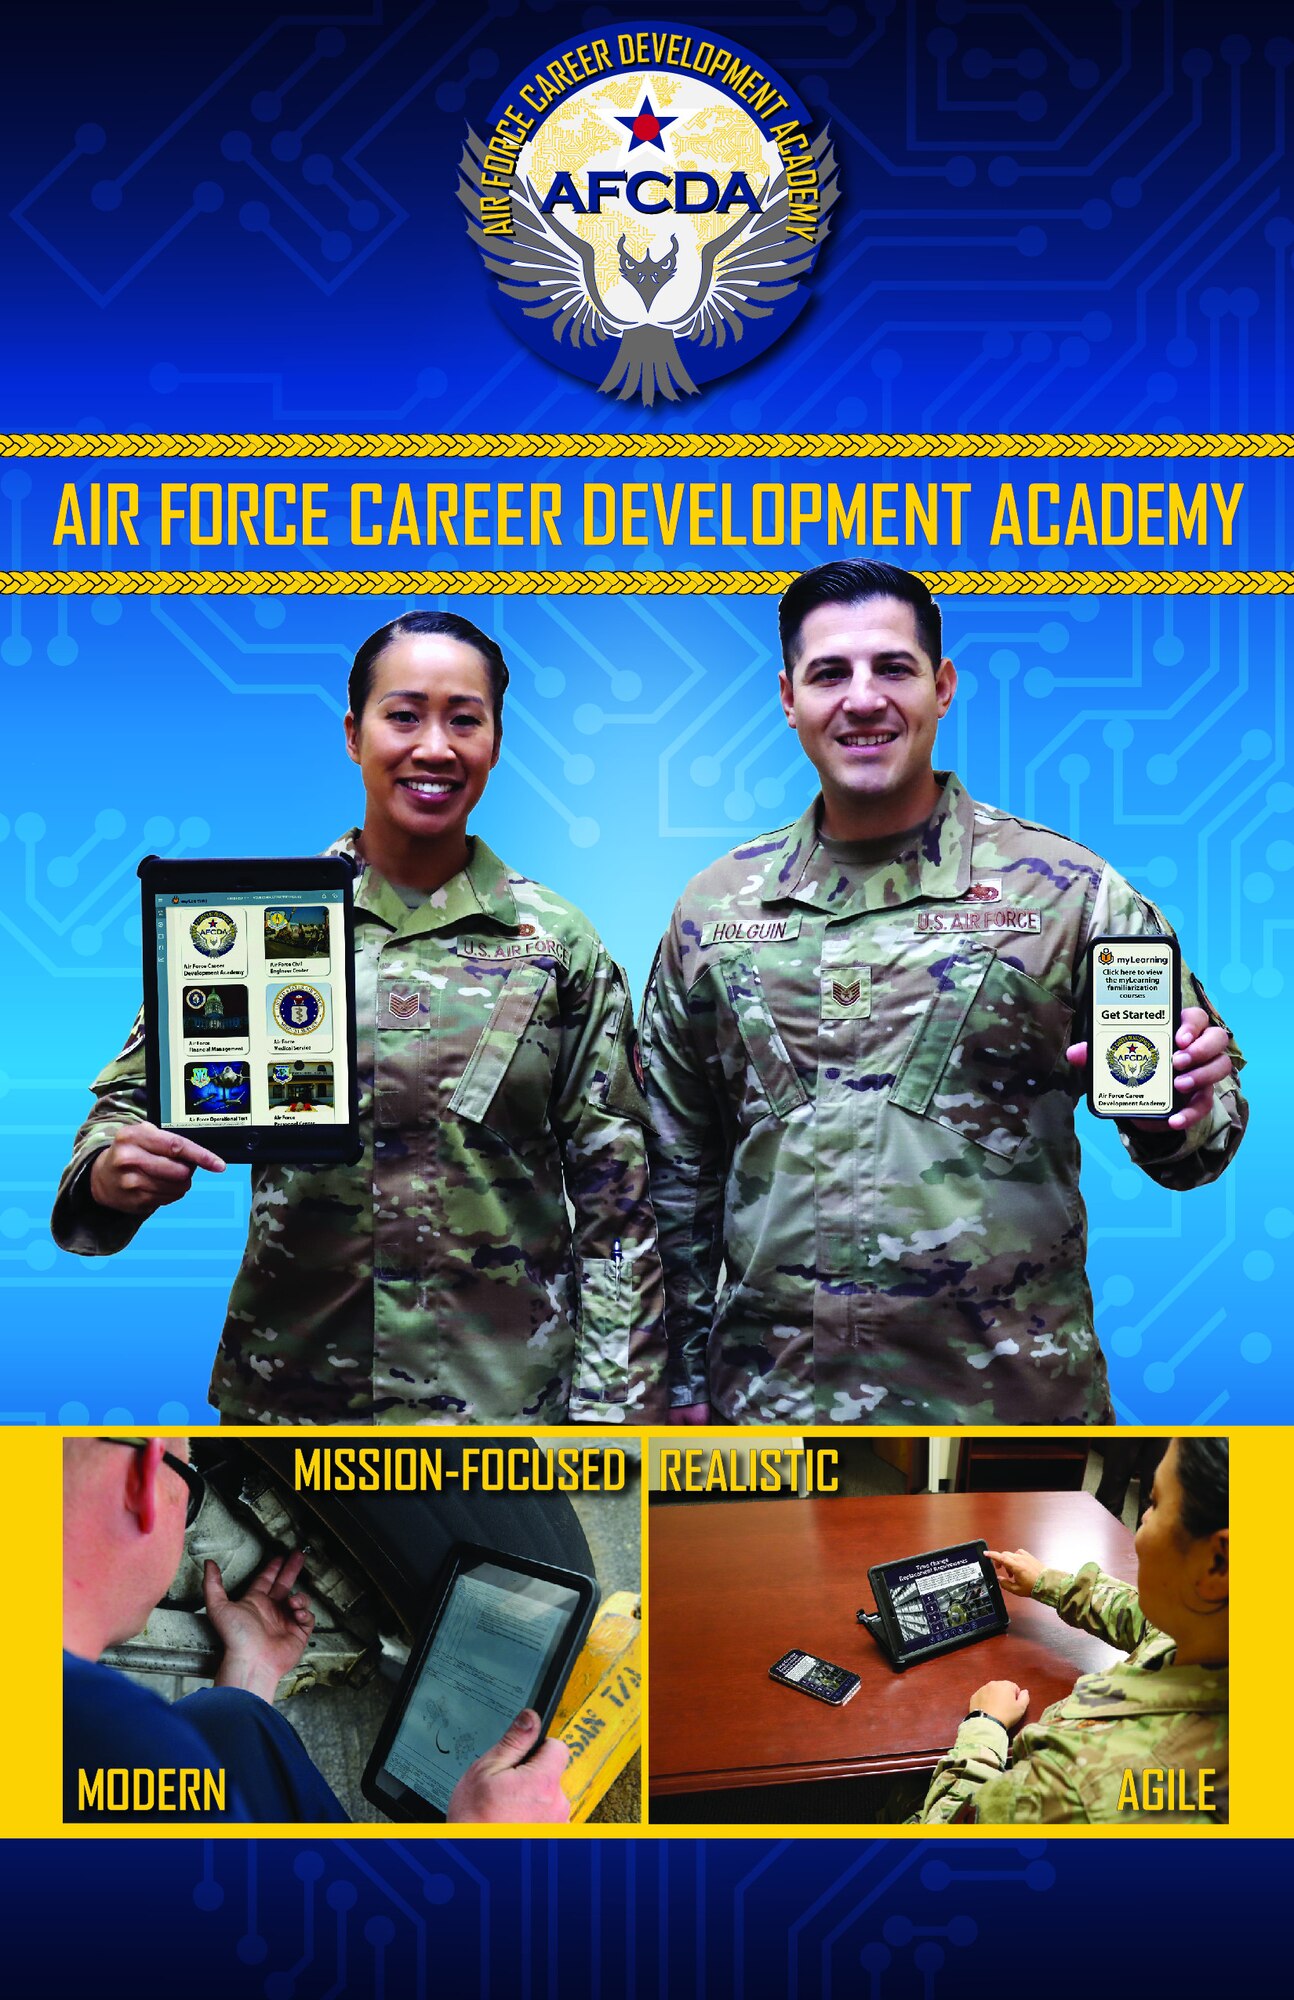 Graphic for the Air Force Career Development Academy depicting two Airmen holding cell phones.